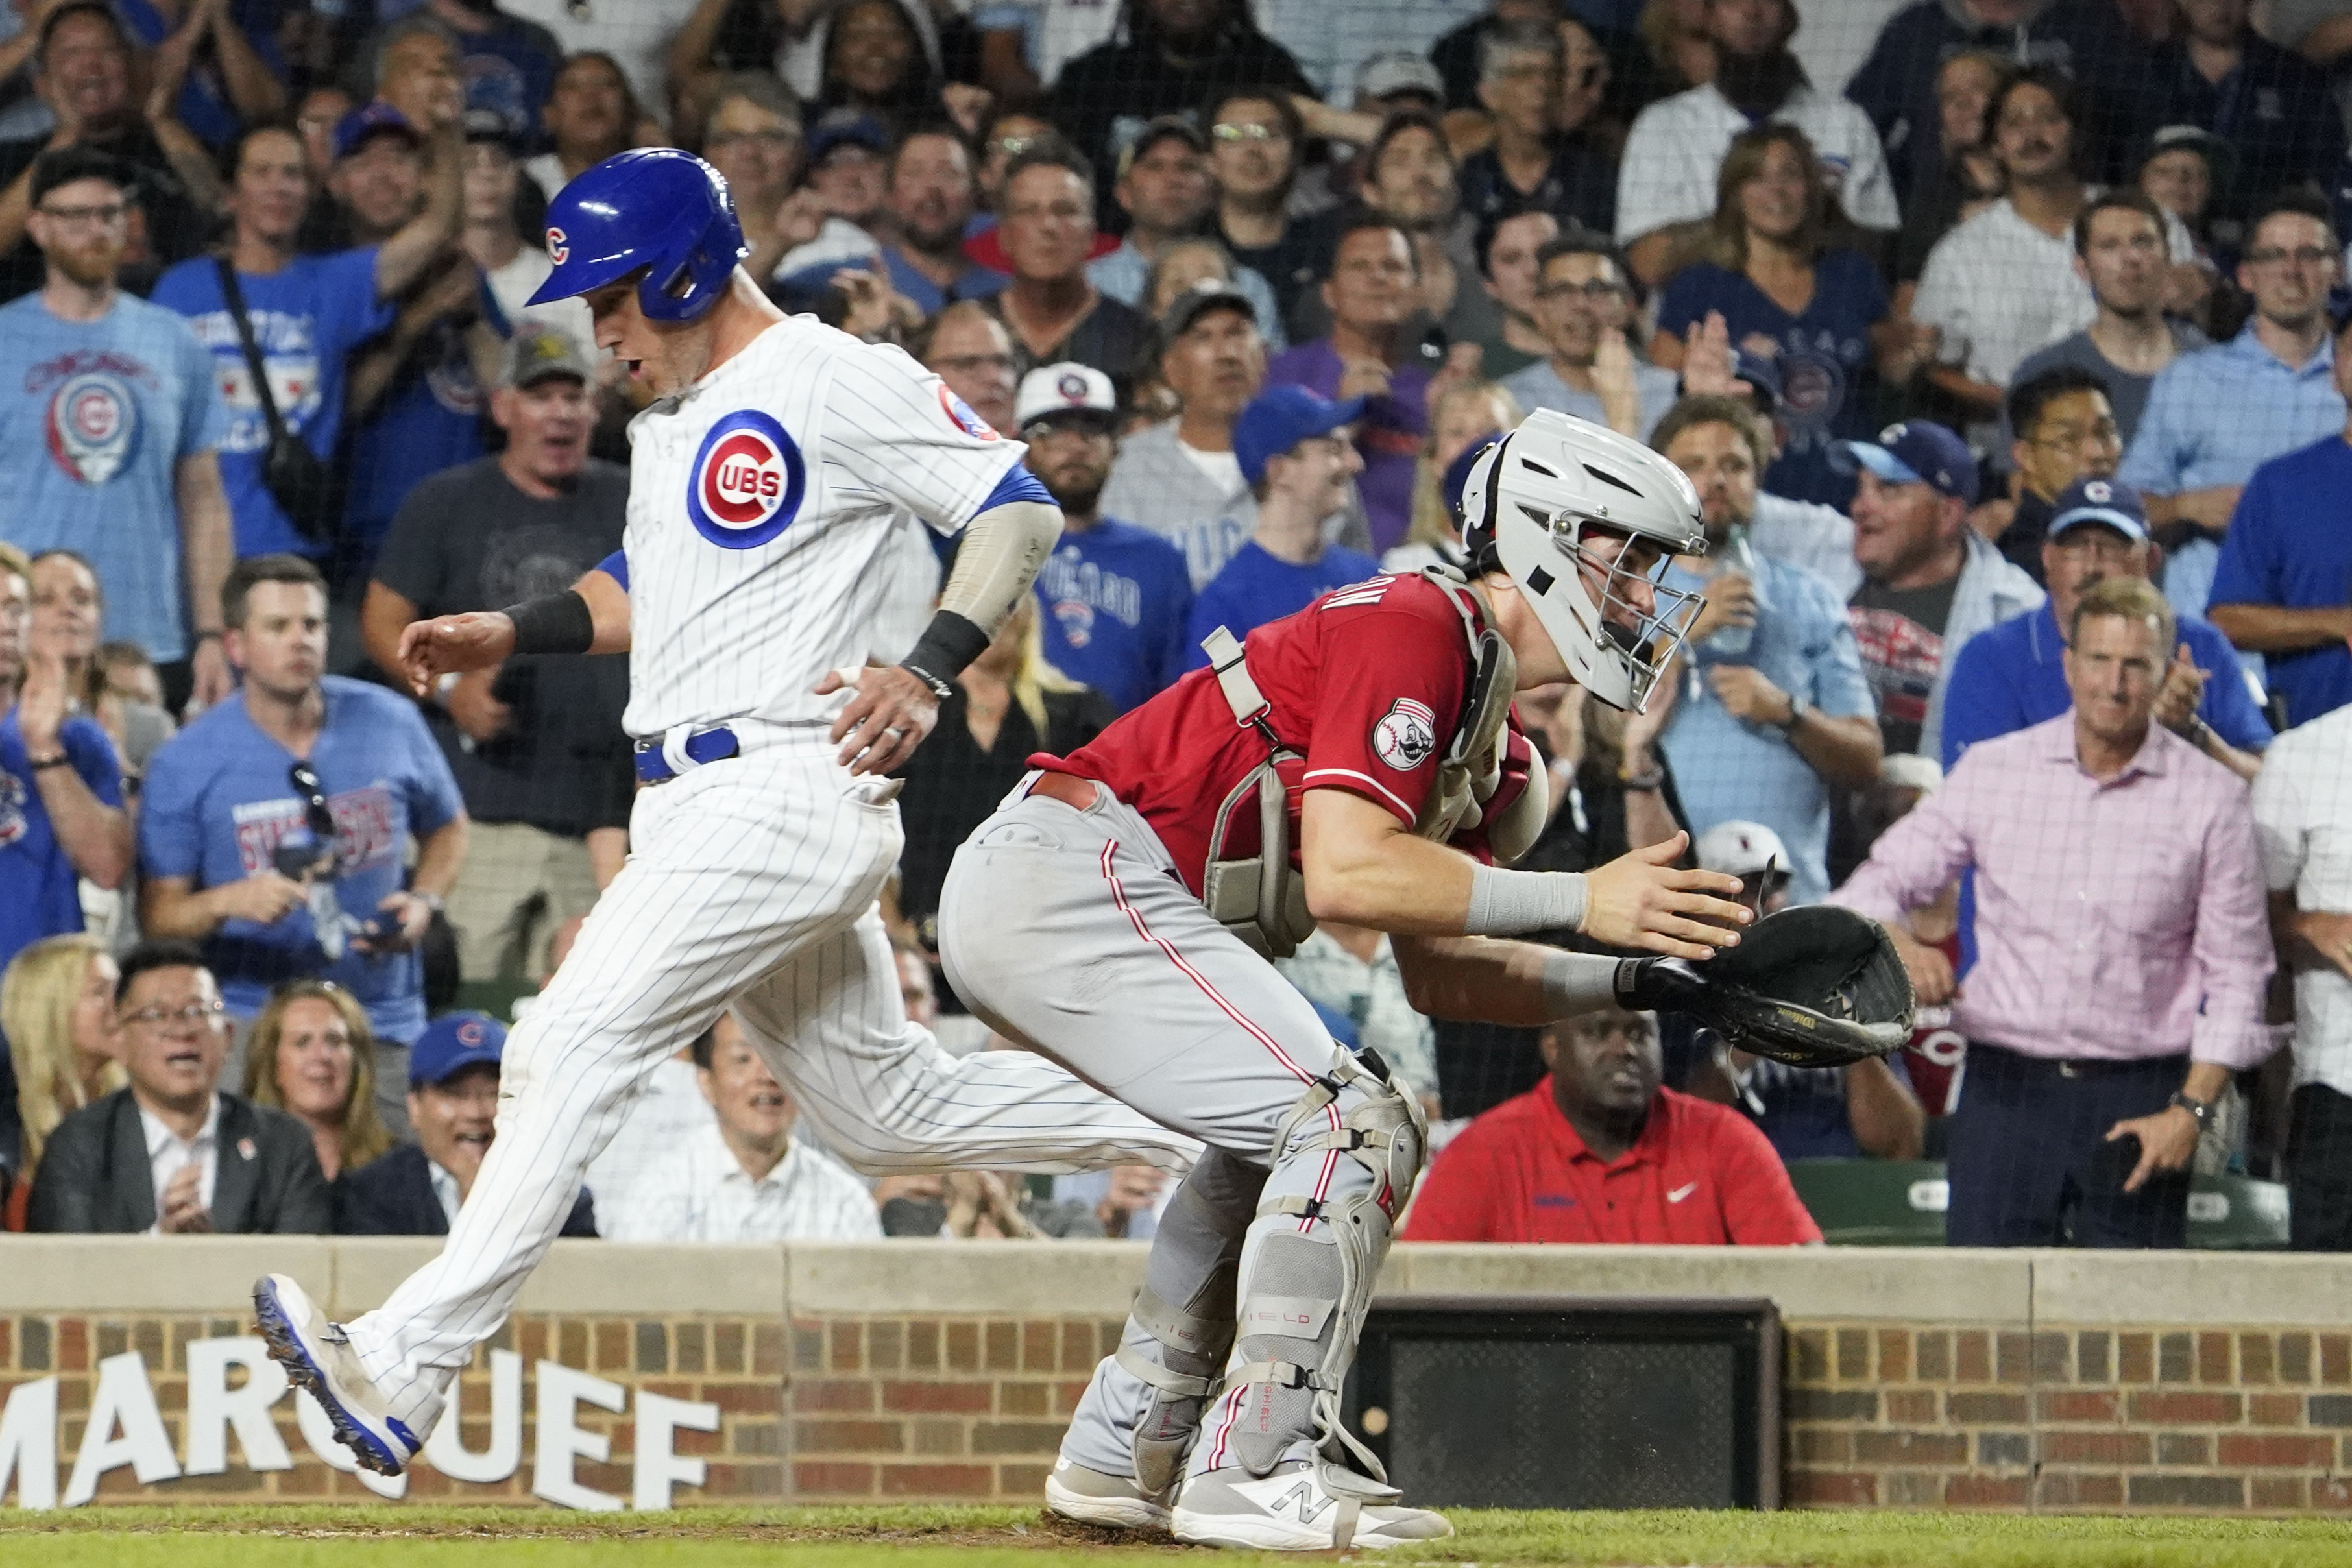 Cubs beat Reds 4-1 to end 8-game skid